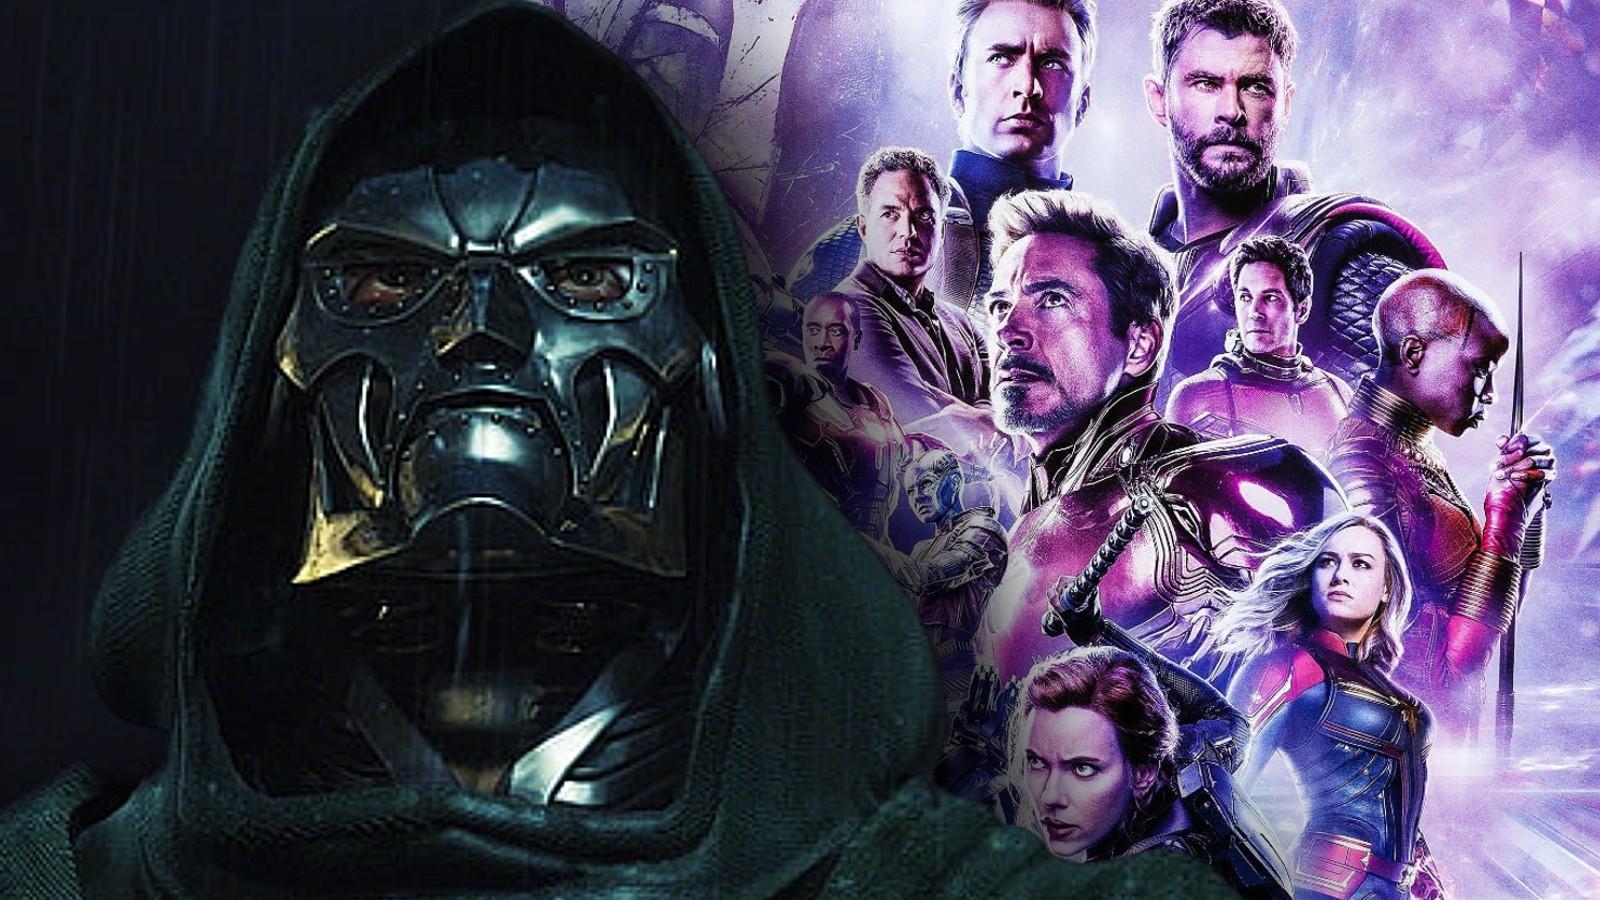 Avengers: Kang Dynasty Poster Imagines A Line-Up That Rivals Endgame